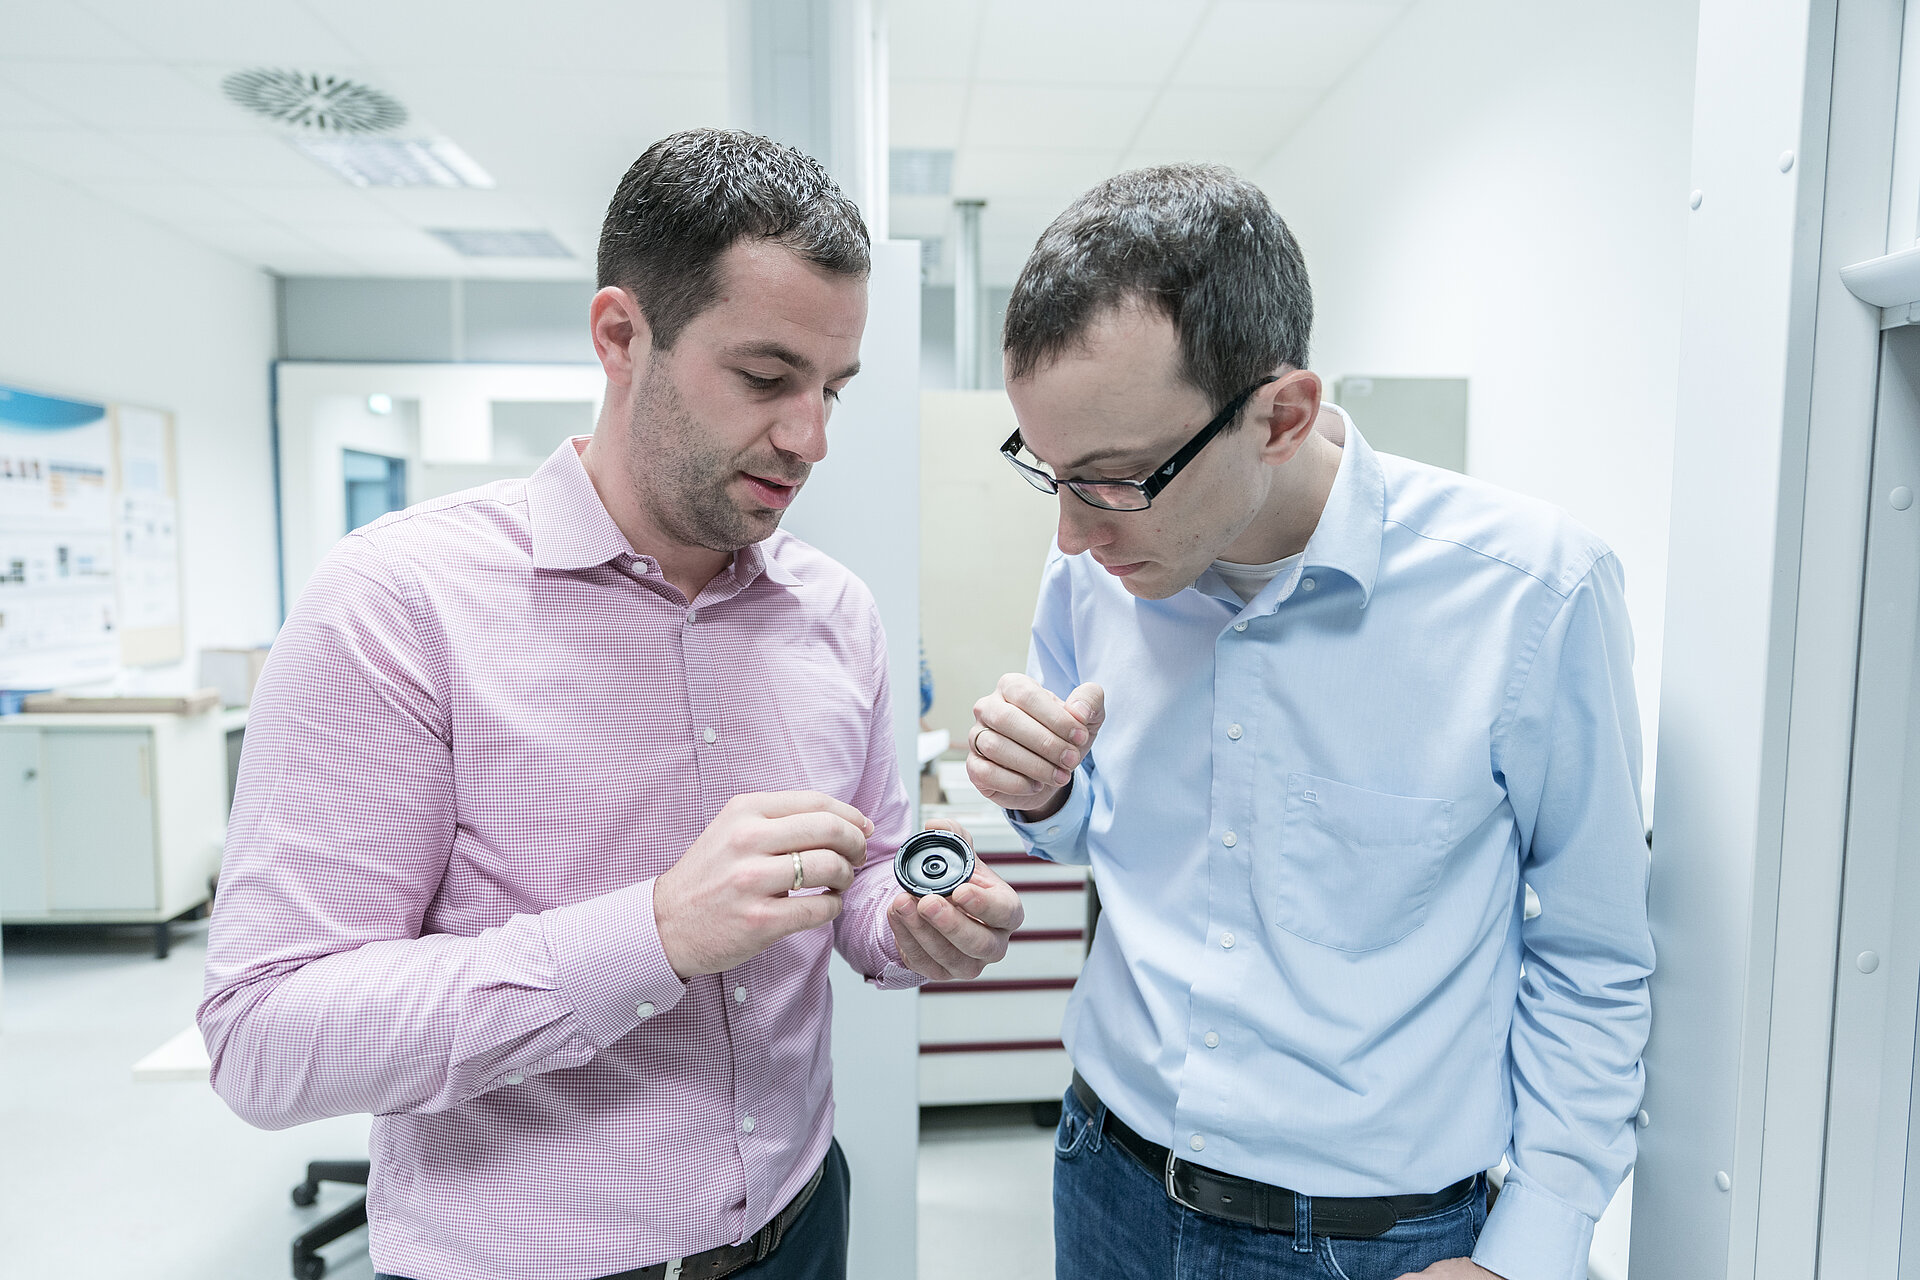 Dr. Fabian Kaiser explains his new job in the tribology laboratory to Dr. Neuberger.